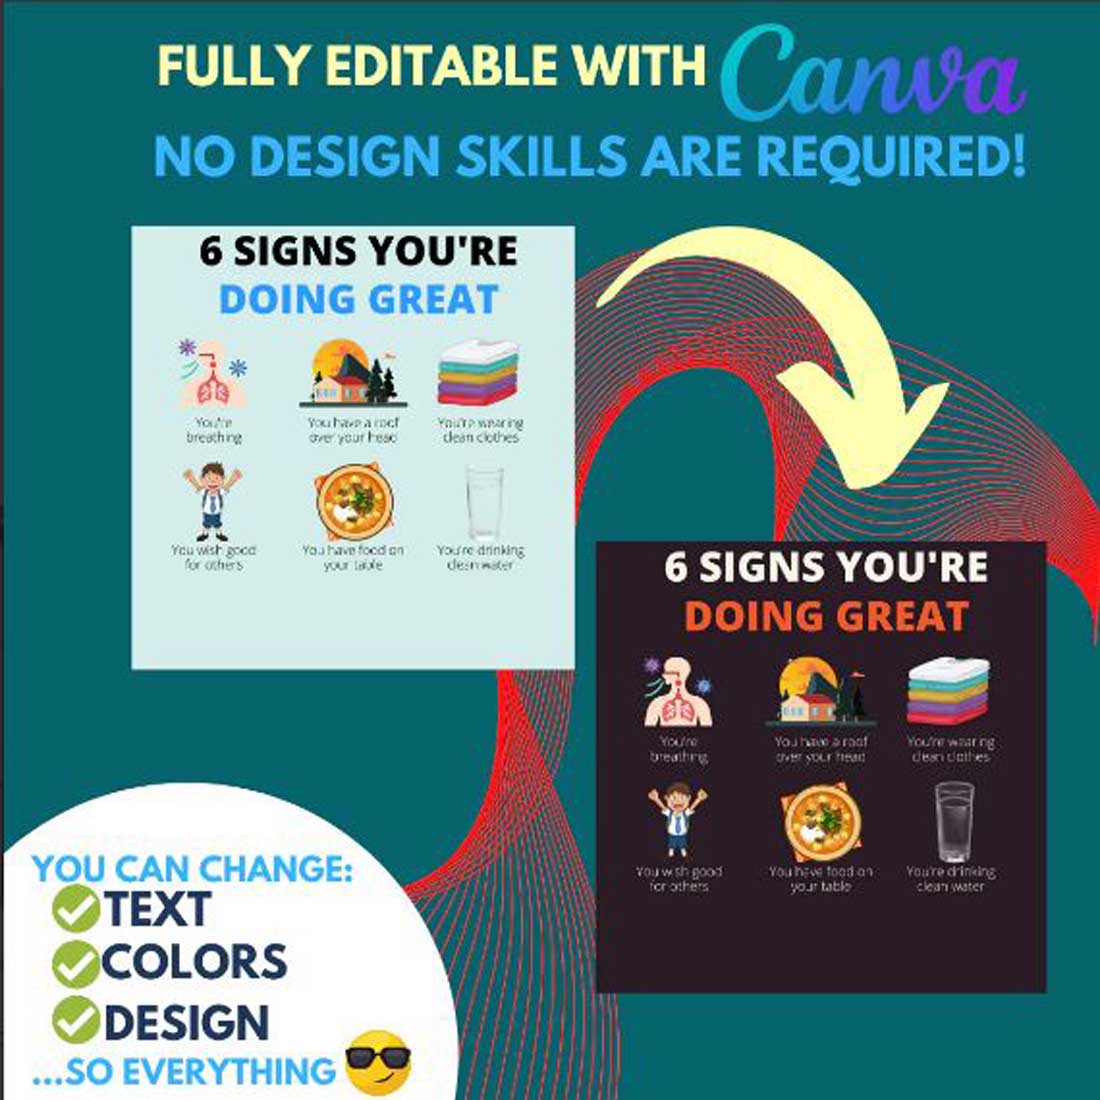 Editable Canva Template | Customizable Design for Personal and Business Use | Instant Download preview image.